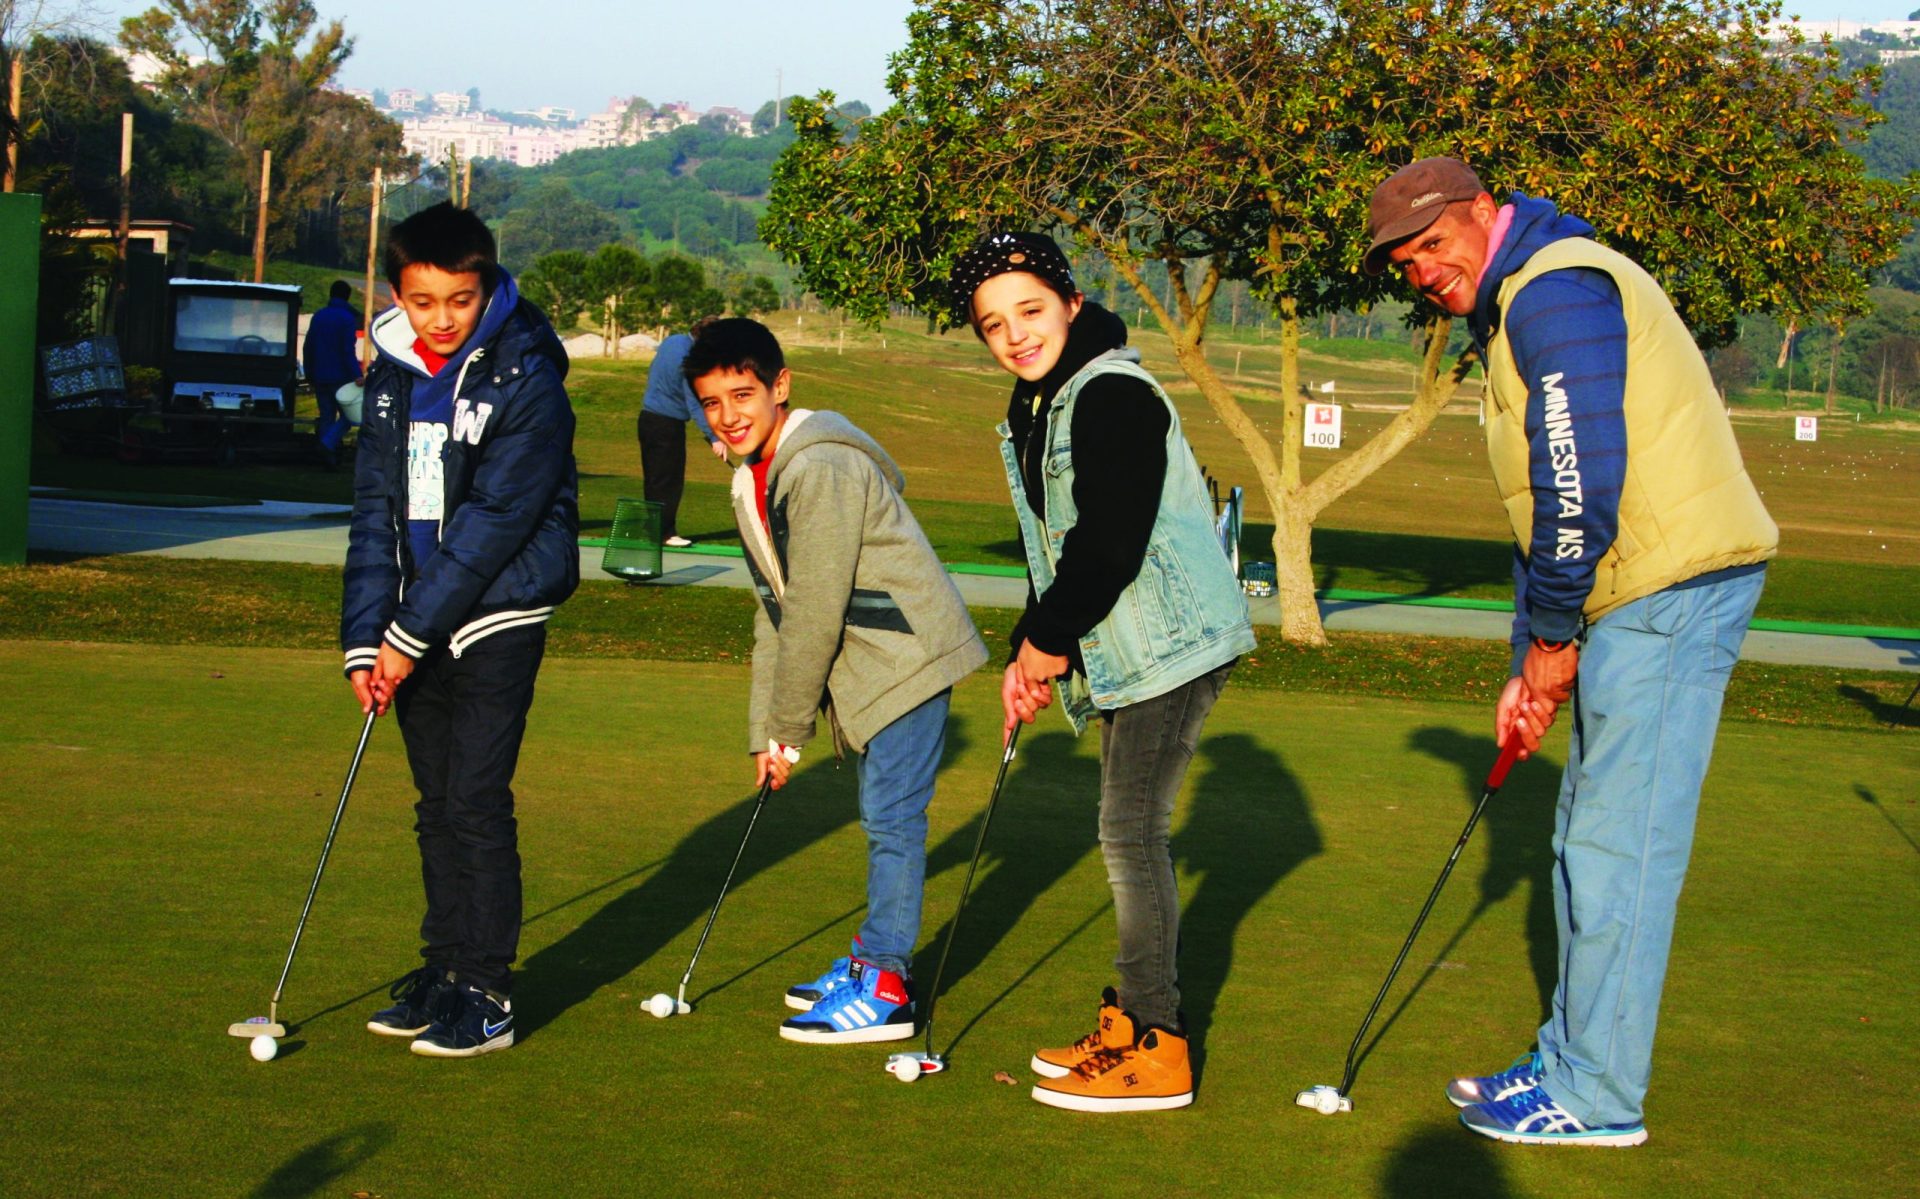 Golfe ‘low cost’  na cidade